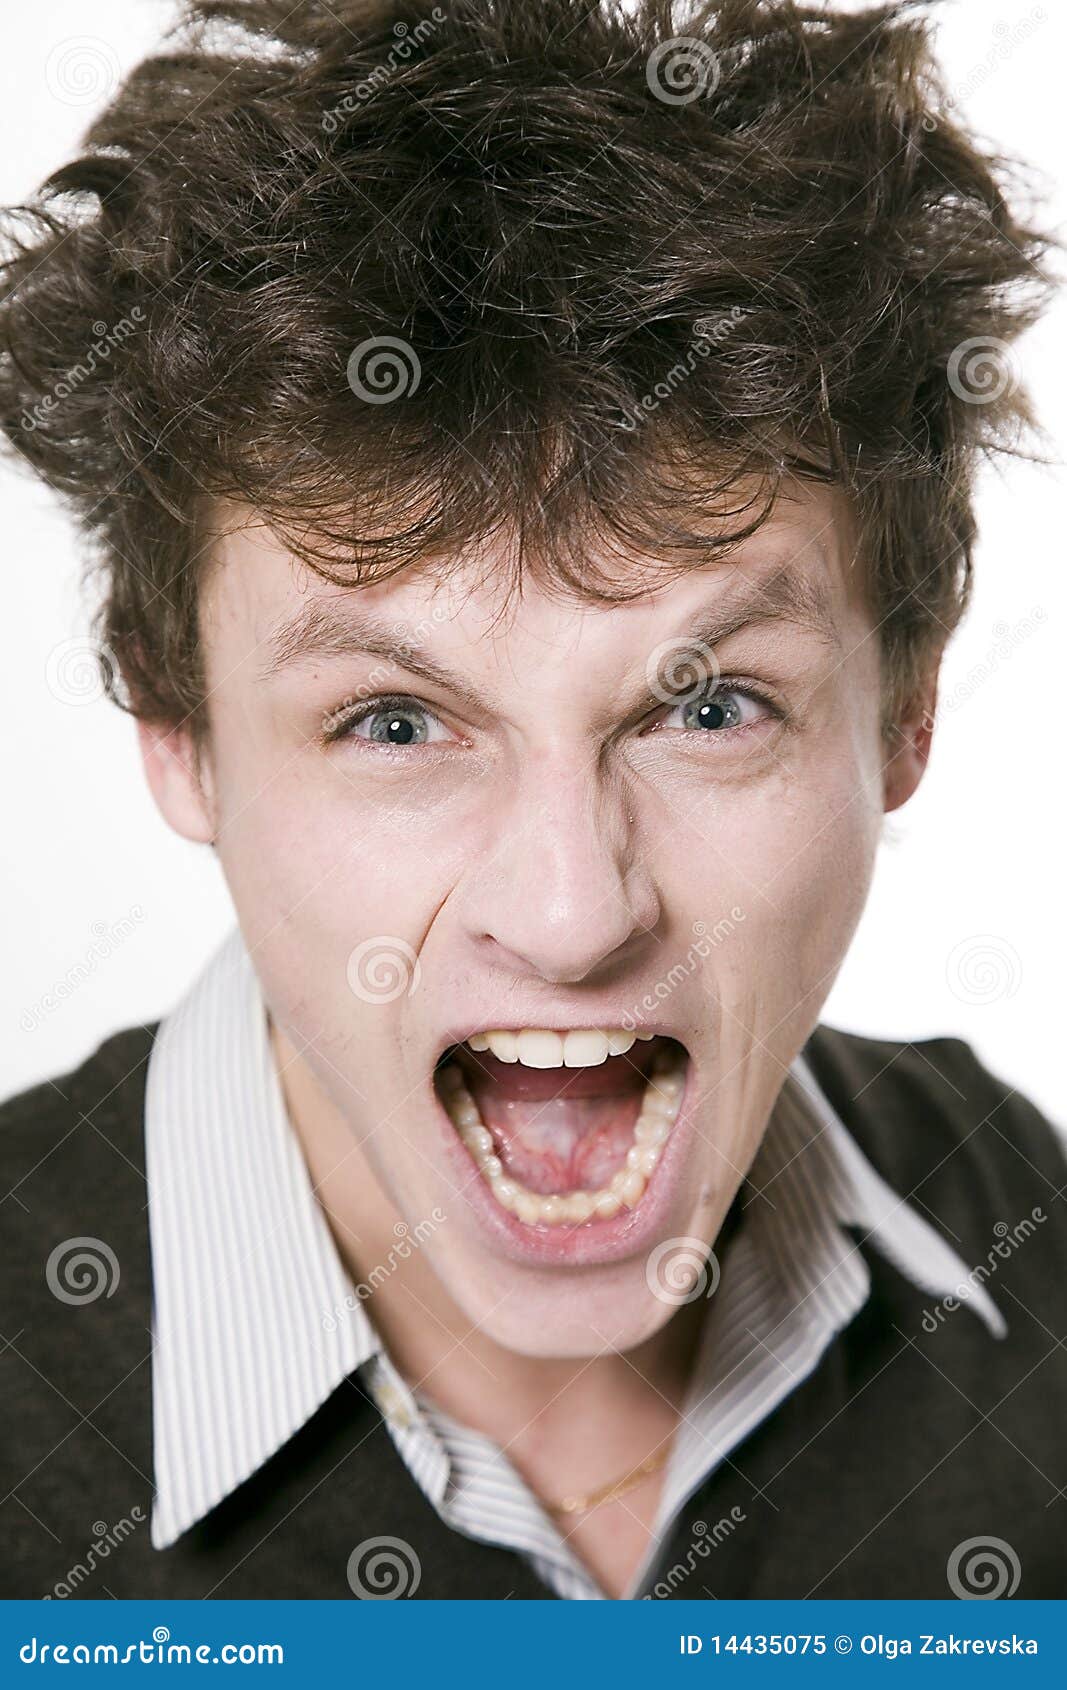 Completely shocked man by dundanim Vectors & Illustrations with Unlimited Downloads - Yayimages